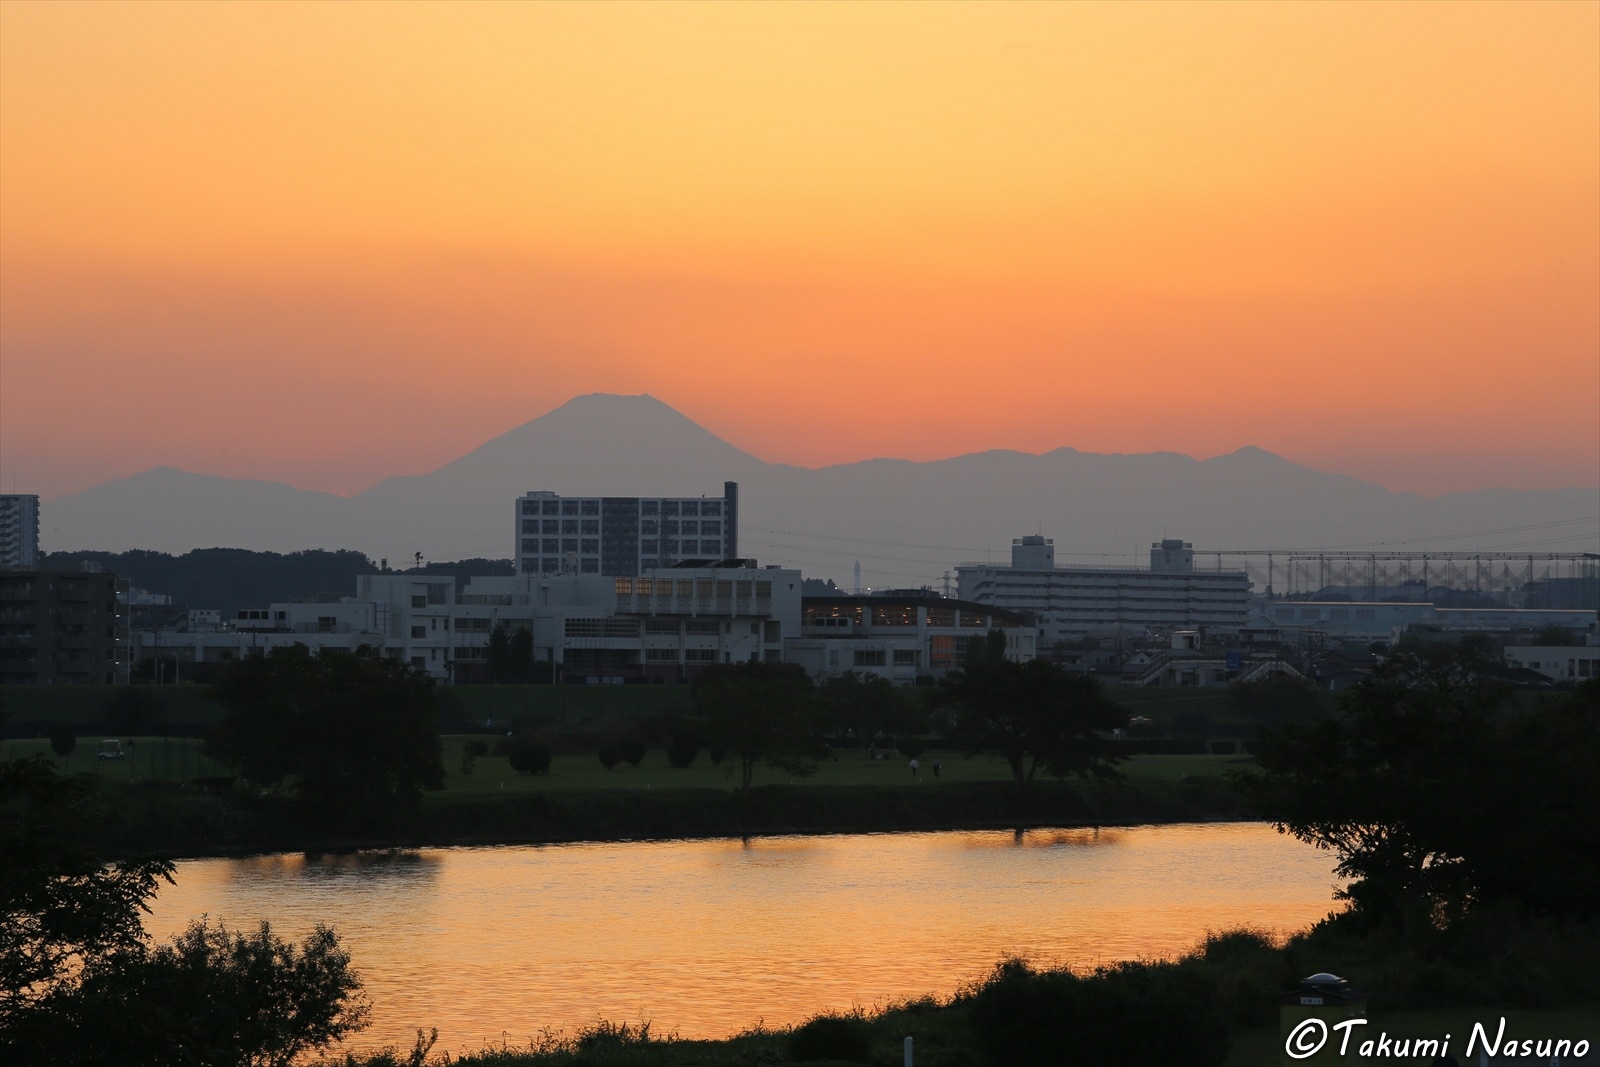 Sunset over Tama River